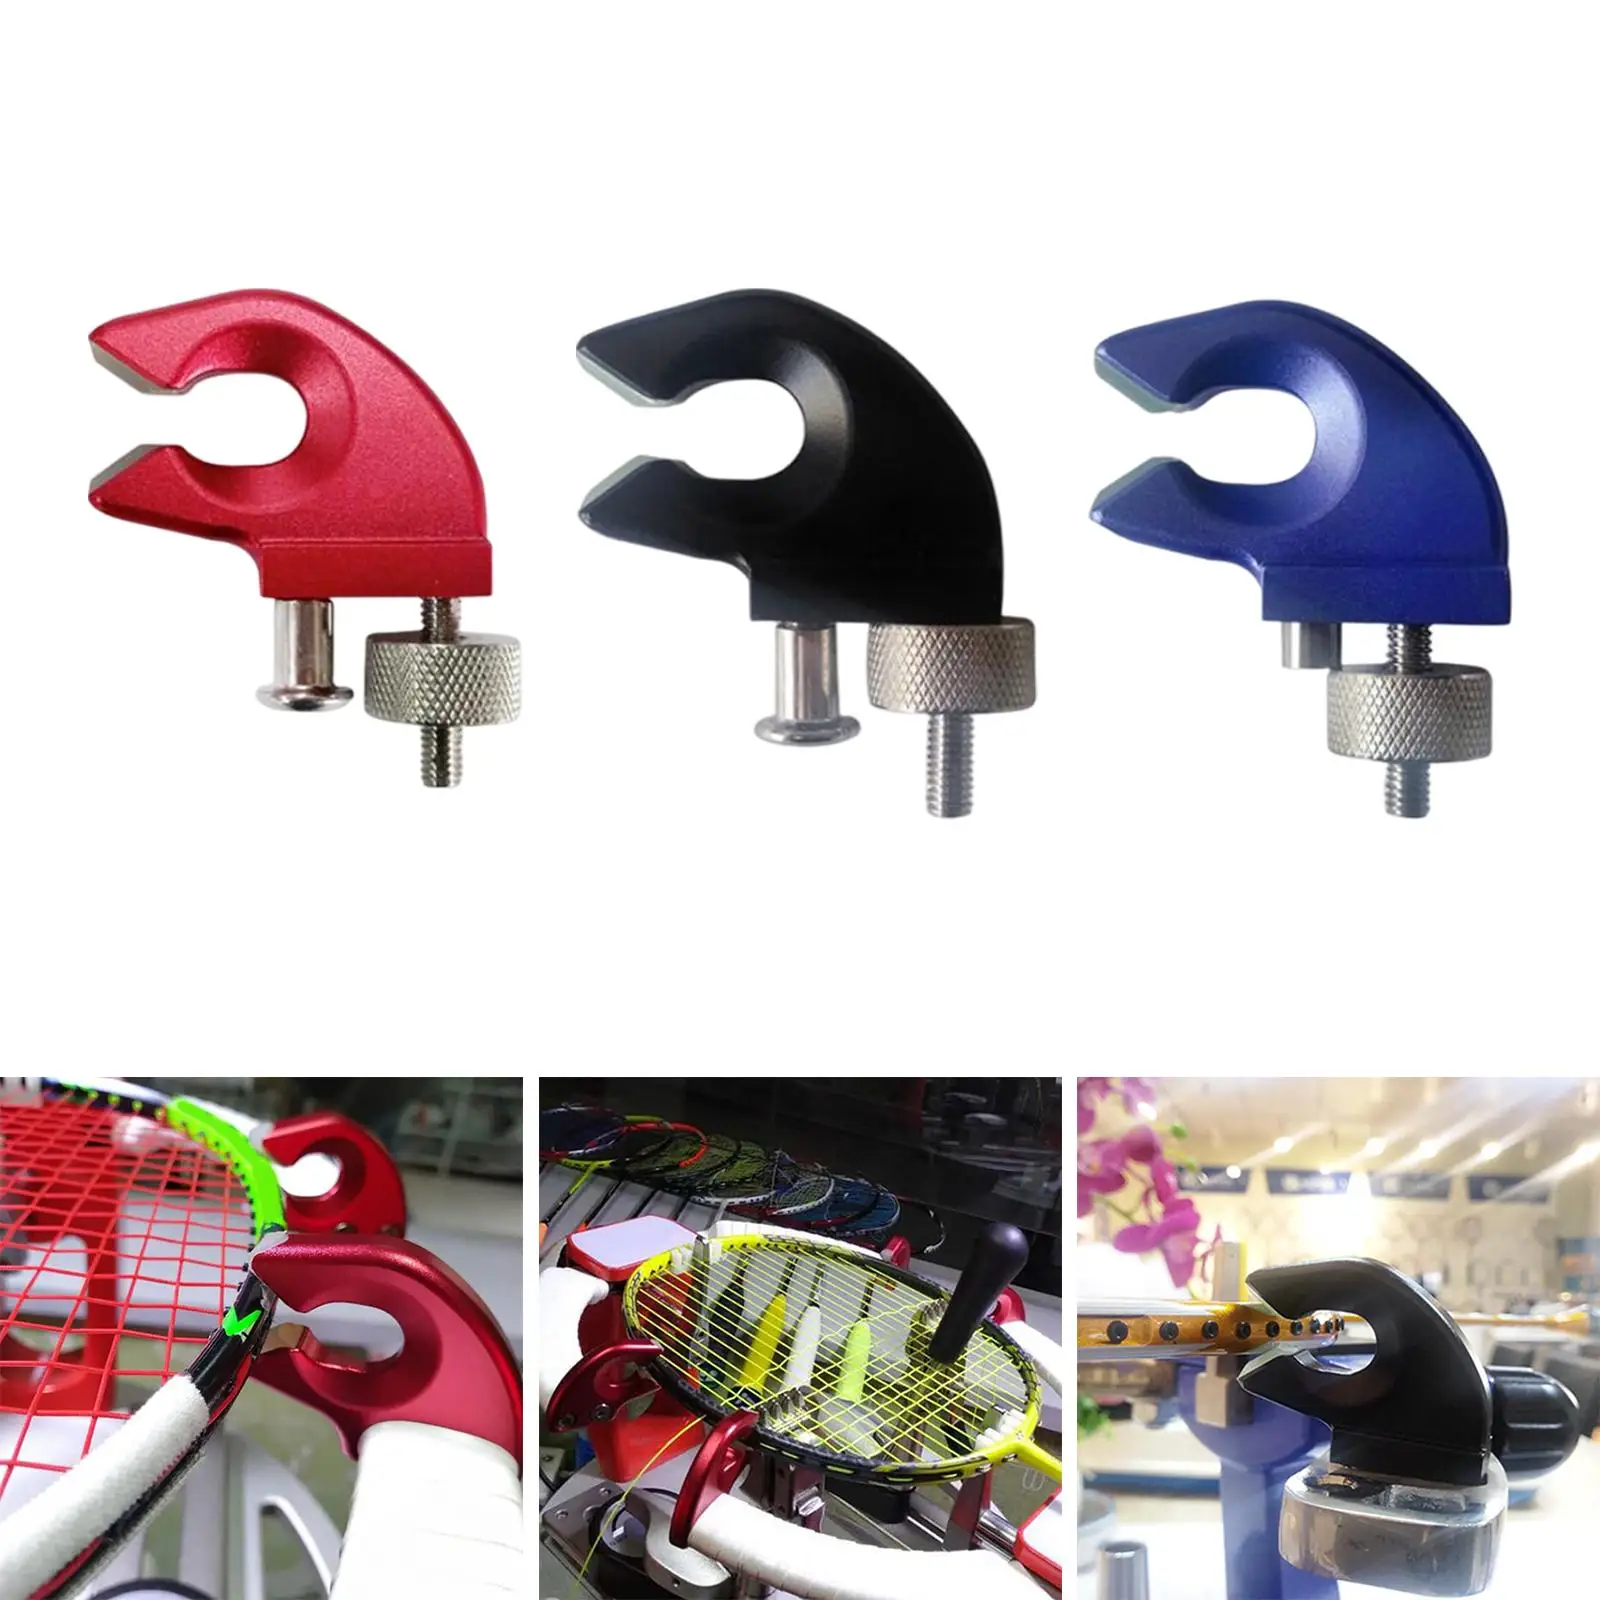 Professional Badminton Stringing clip, Flying Clamp Fixing Clamp, Aluminum Alloy, Stringer, for Racket